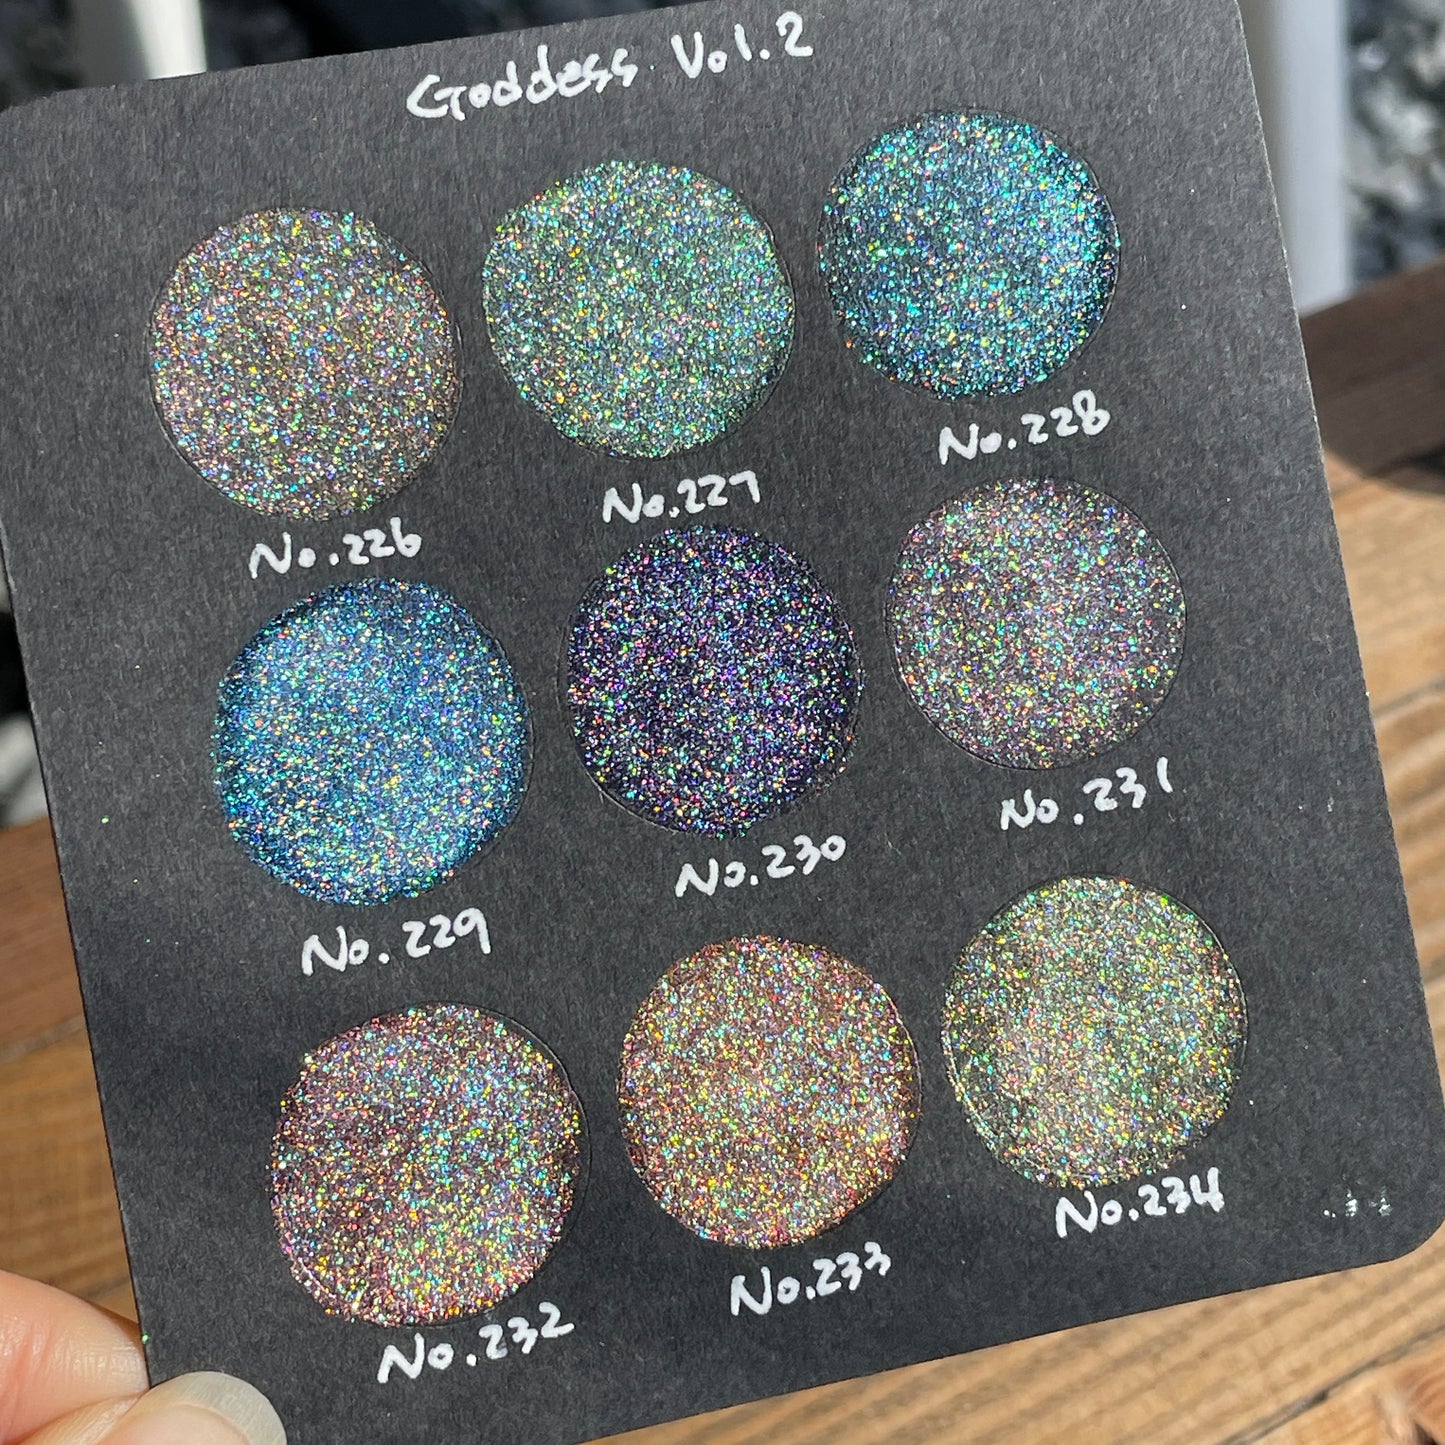 Limited Vol.2 Goddess Quarter Set Handmade Super Shift Aurora Shimmer Holographic Watercolor Paints by iuilewatercolors